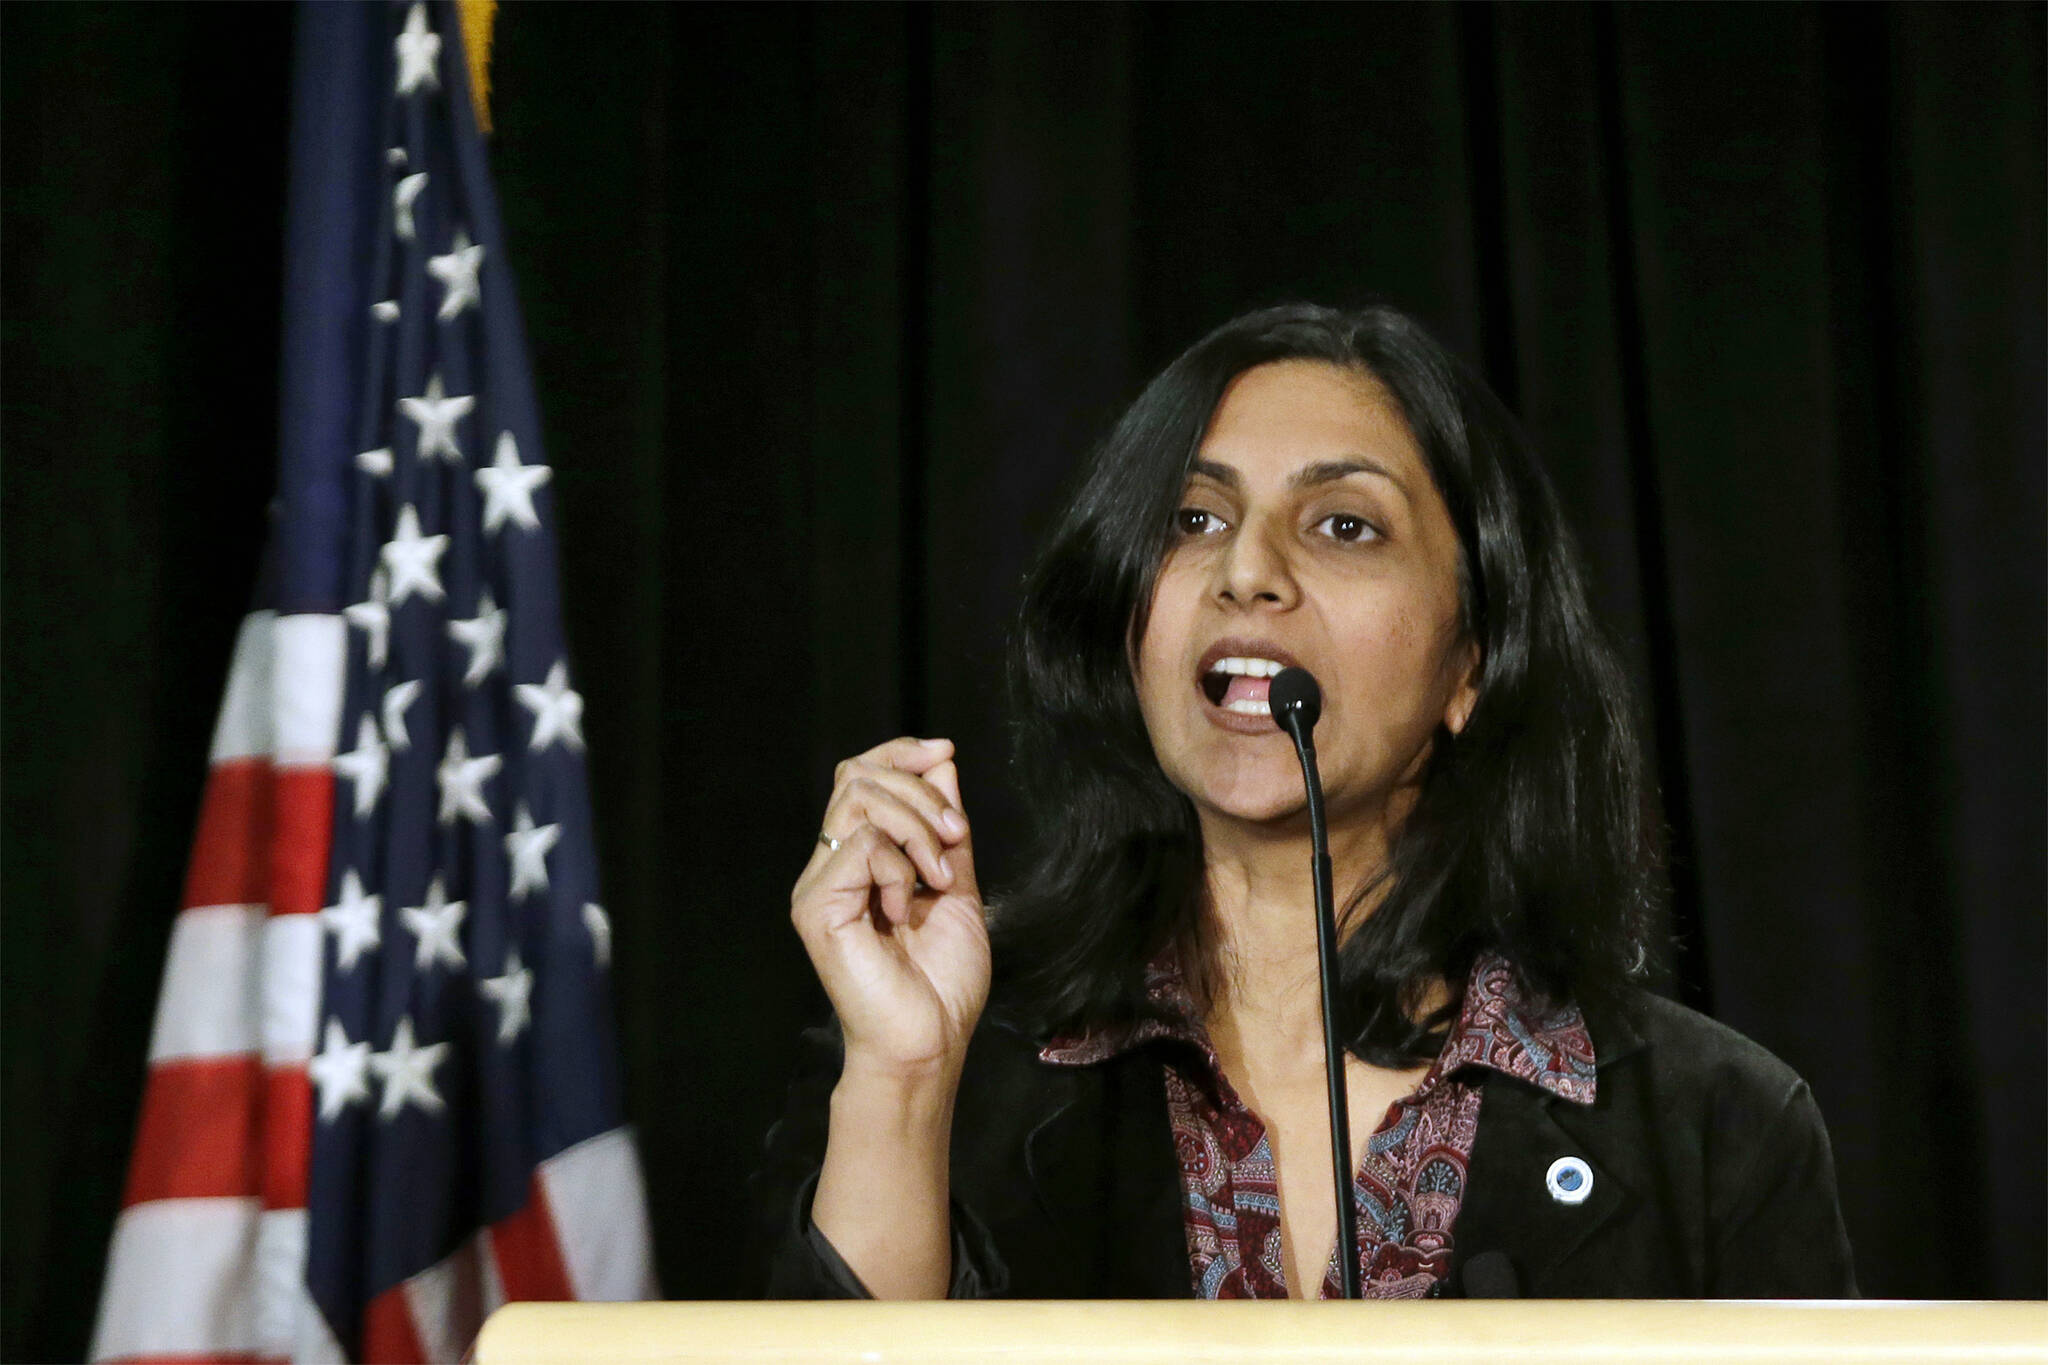 New Seattle City Councilmember Kshama Sawant speaks during an inauguration ceremony for city officials on Jan. 6, 2014, in Seattle. (AP Photo / Elaine Thompson, File)